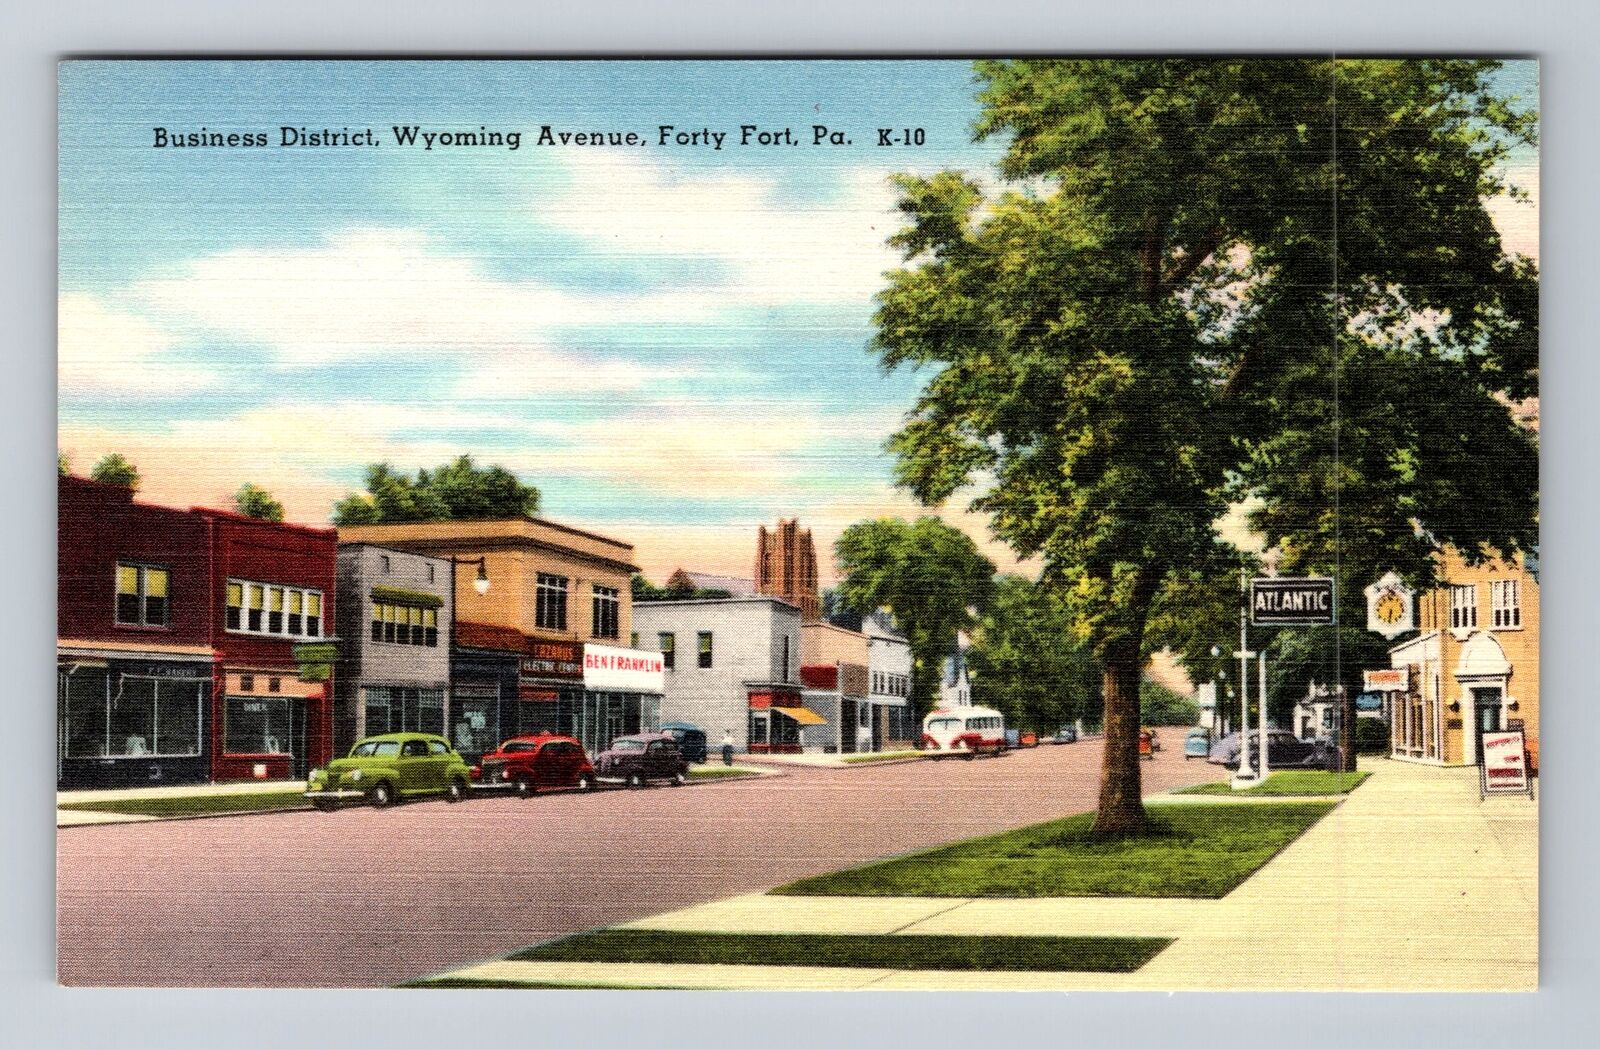 Forty Fort PA-Pennsylvania, Wyoming Avenue Business District Vintage Postcard